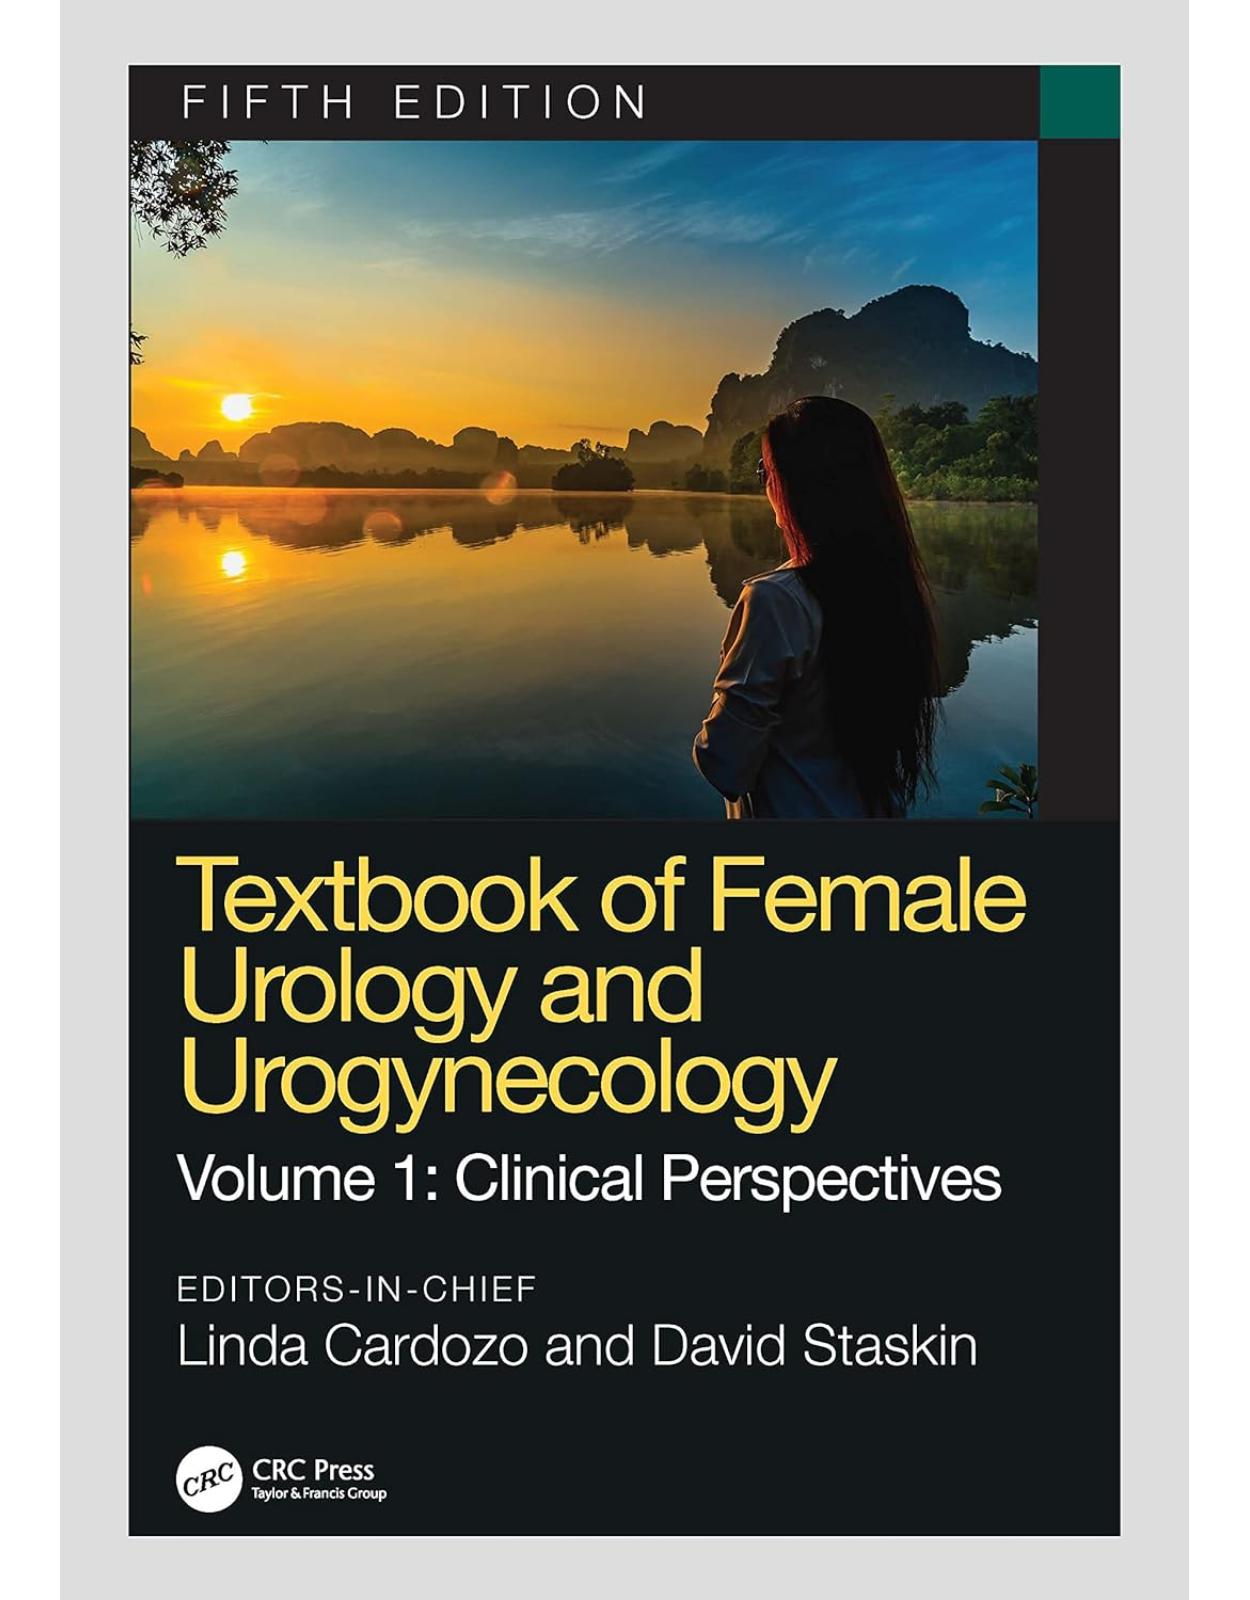 Textbook of Female Urology and Urogynecology: Clinical Perspectives